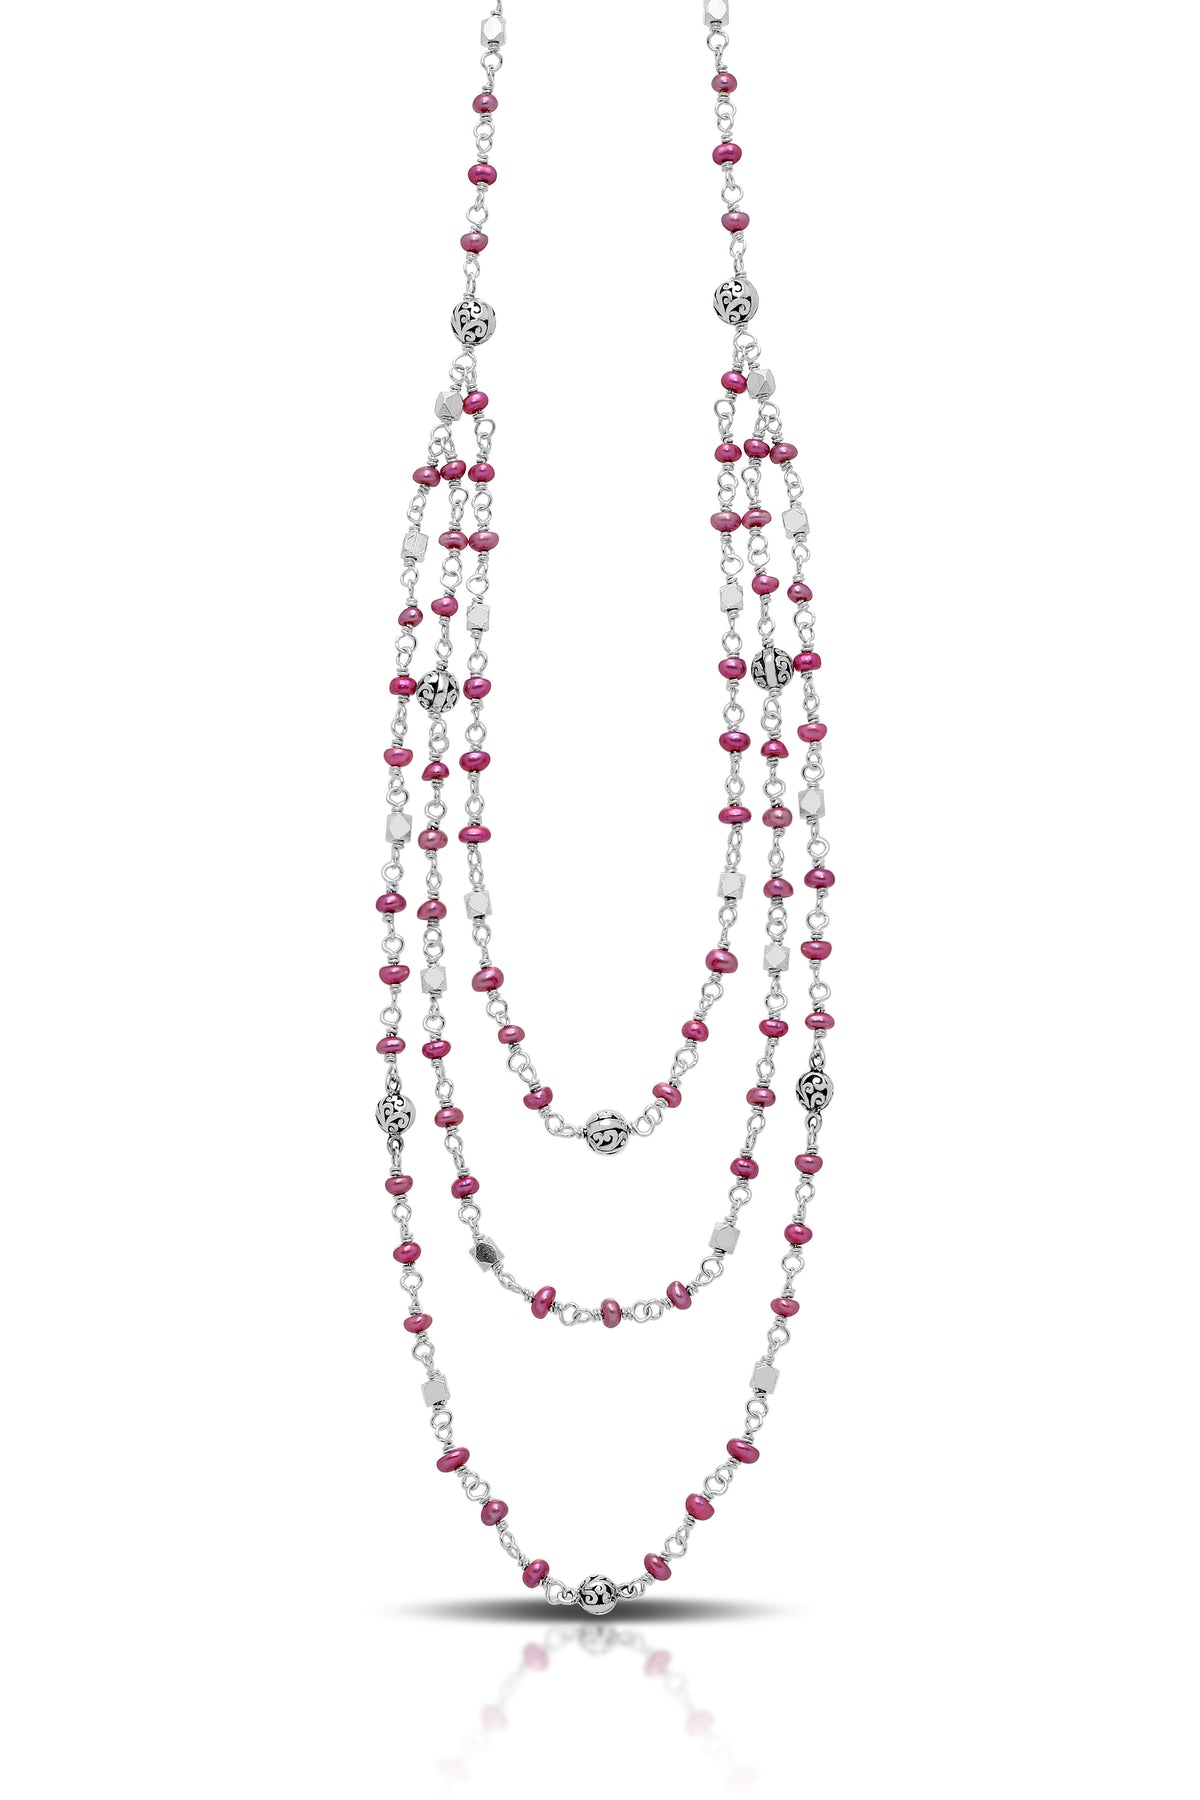 Pink Pearl Bead with Scroll Sterling Silver Bead Triple Strands Necklace. 17" Chain